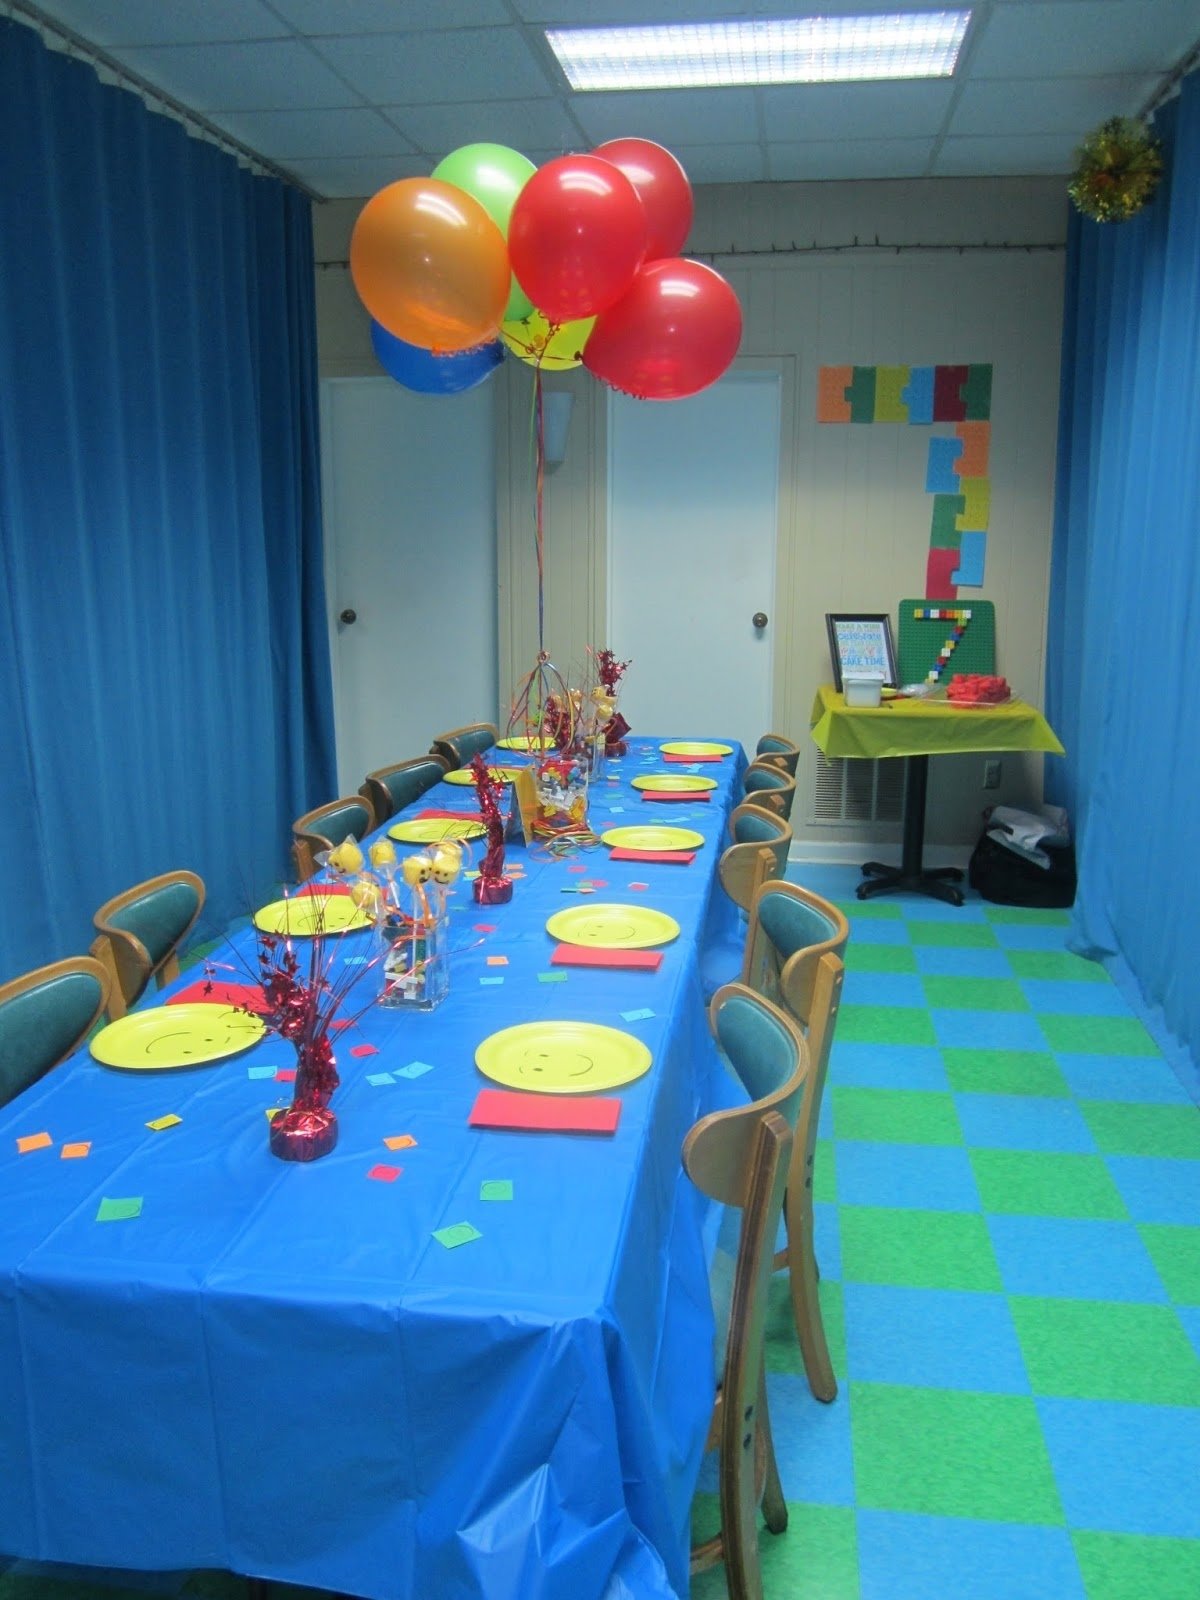 10 Stylish Five Year Old Birthday Party Ideas cute year birthday party ideas entertainment ideas for visit 30 2022